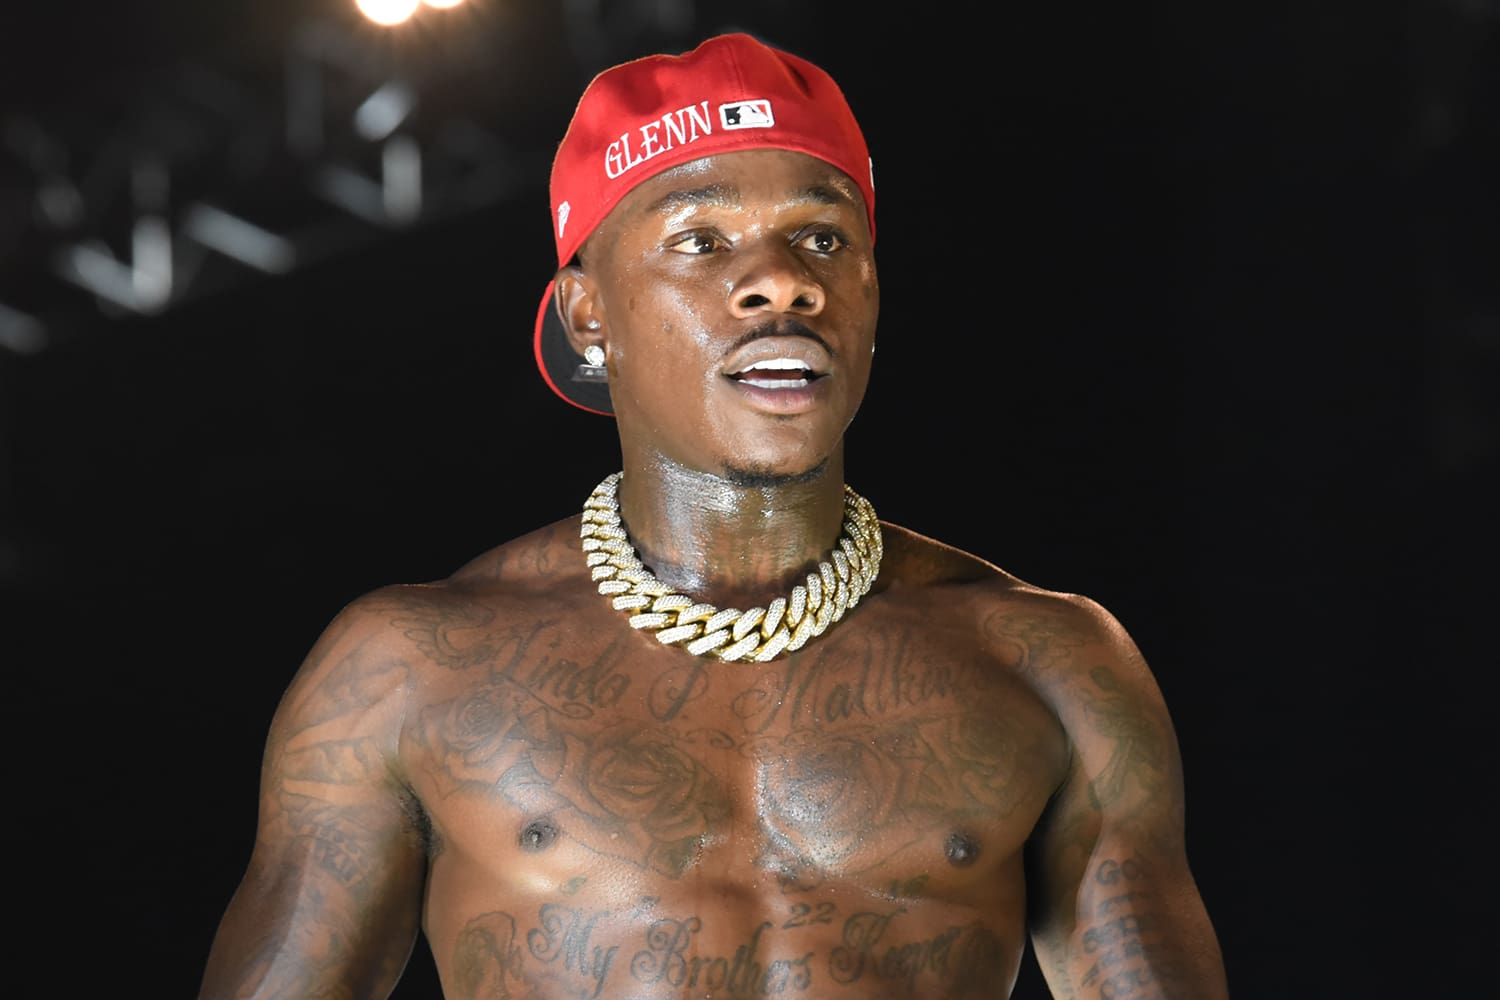 dababy-has-something-to-say-about-a-physical-altercation-with-brandon-hills